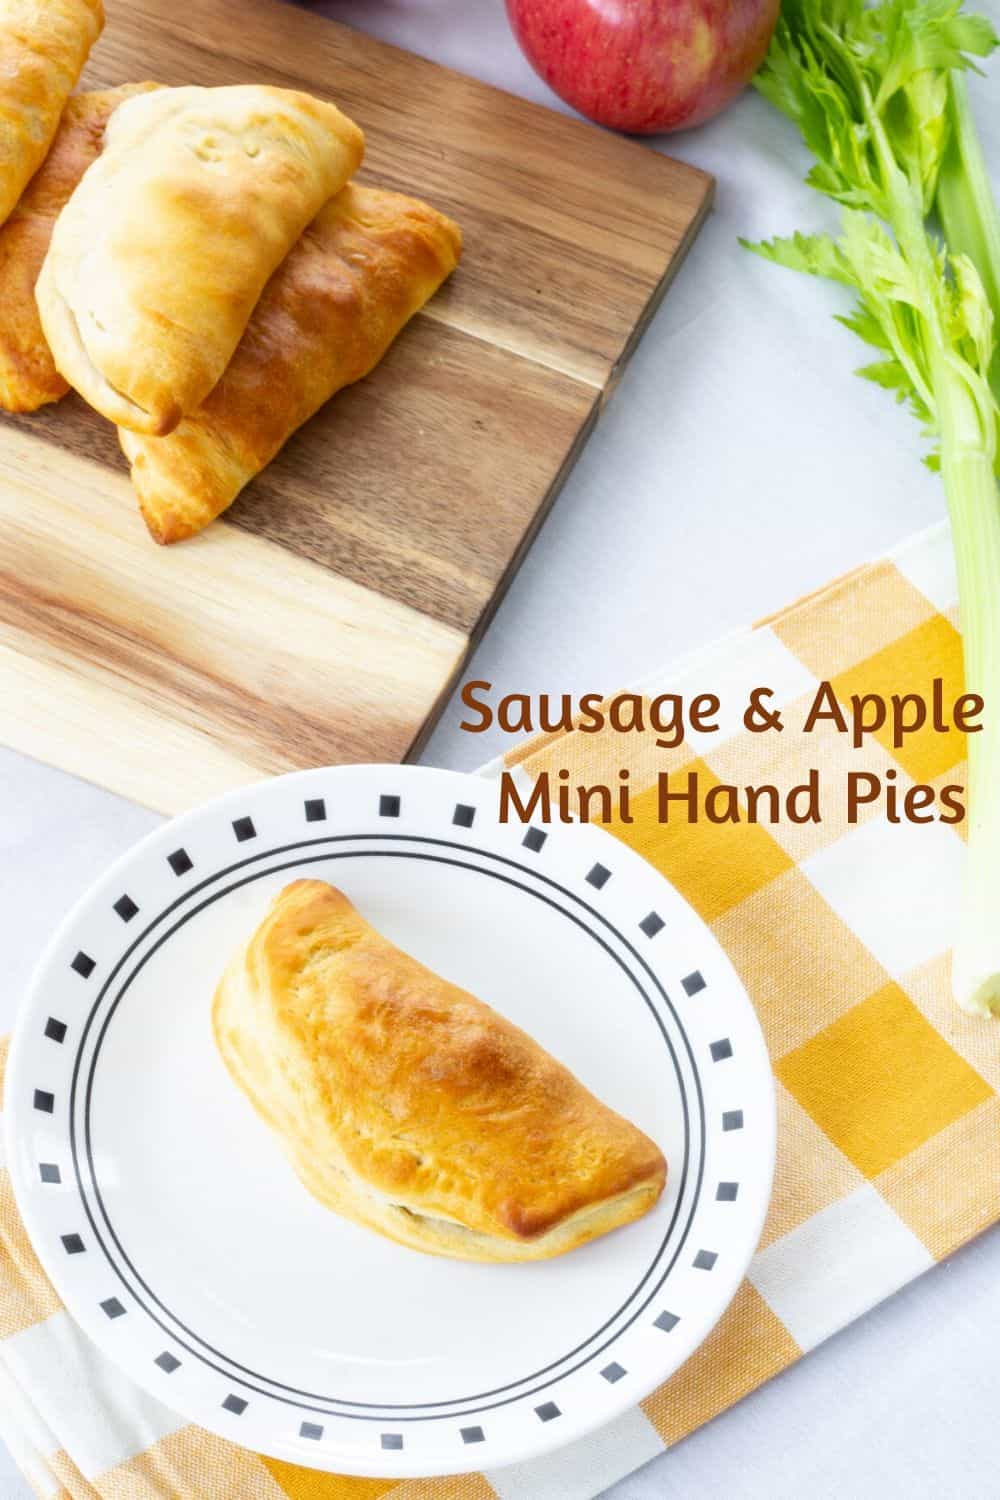 Sausage & Apple Hand Pies are made with ground sausage, apples, celery, and canned biscuits for a tasty mini hand held snack that is so easy to make!